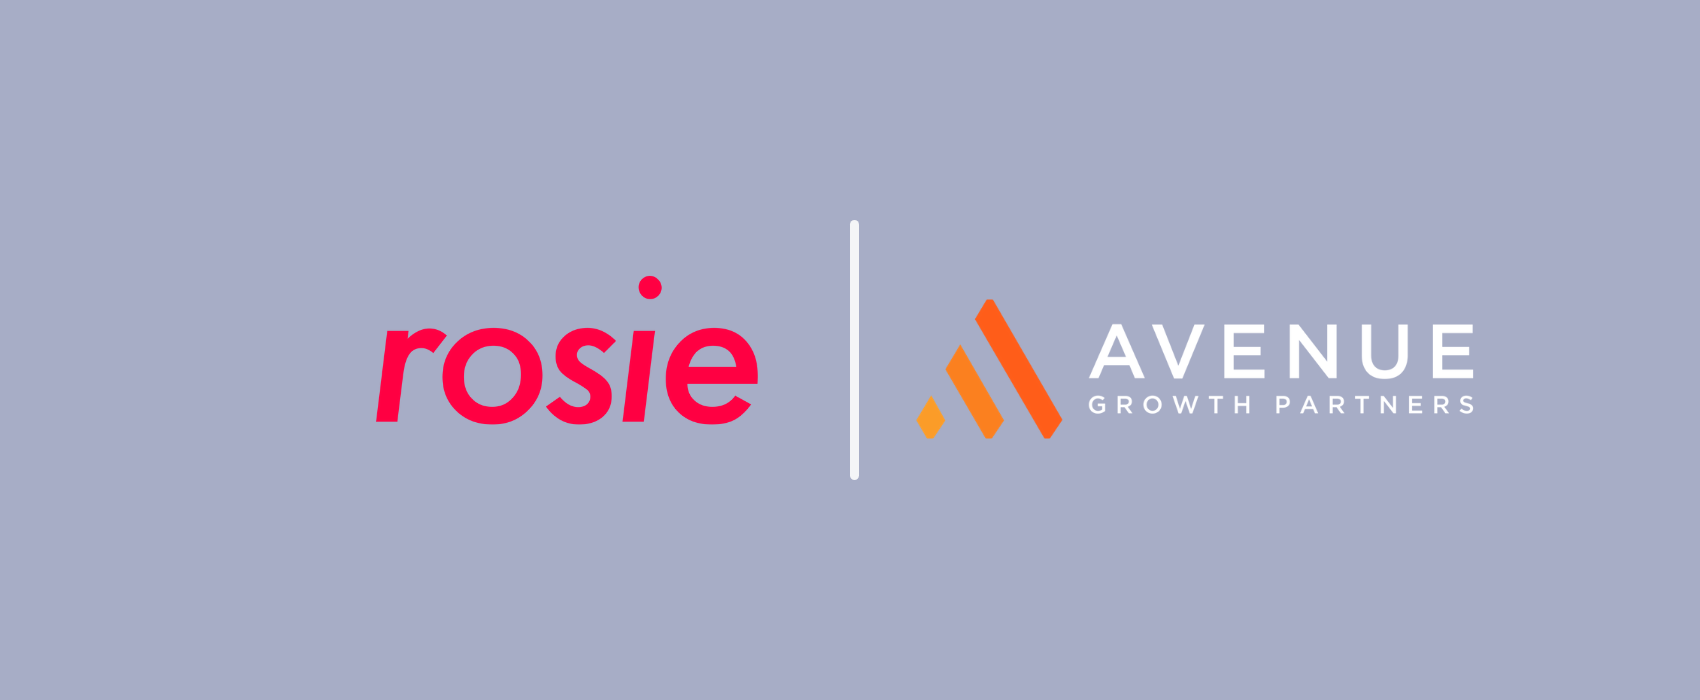 News release: Rosie Closes $10 Million Series A Financing from Avenue Growth Partners